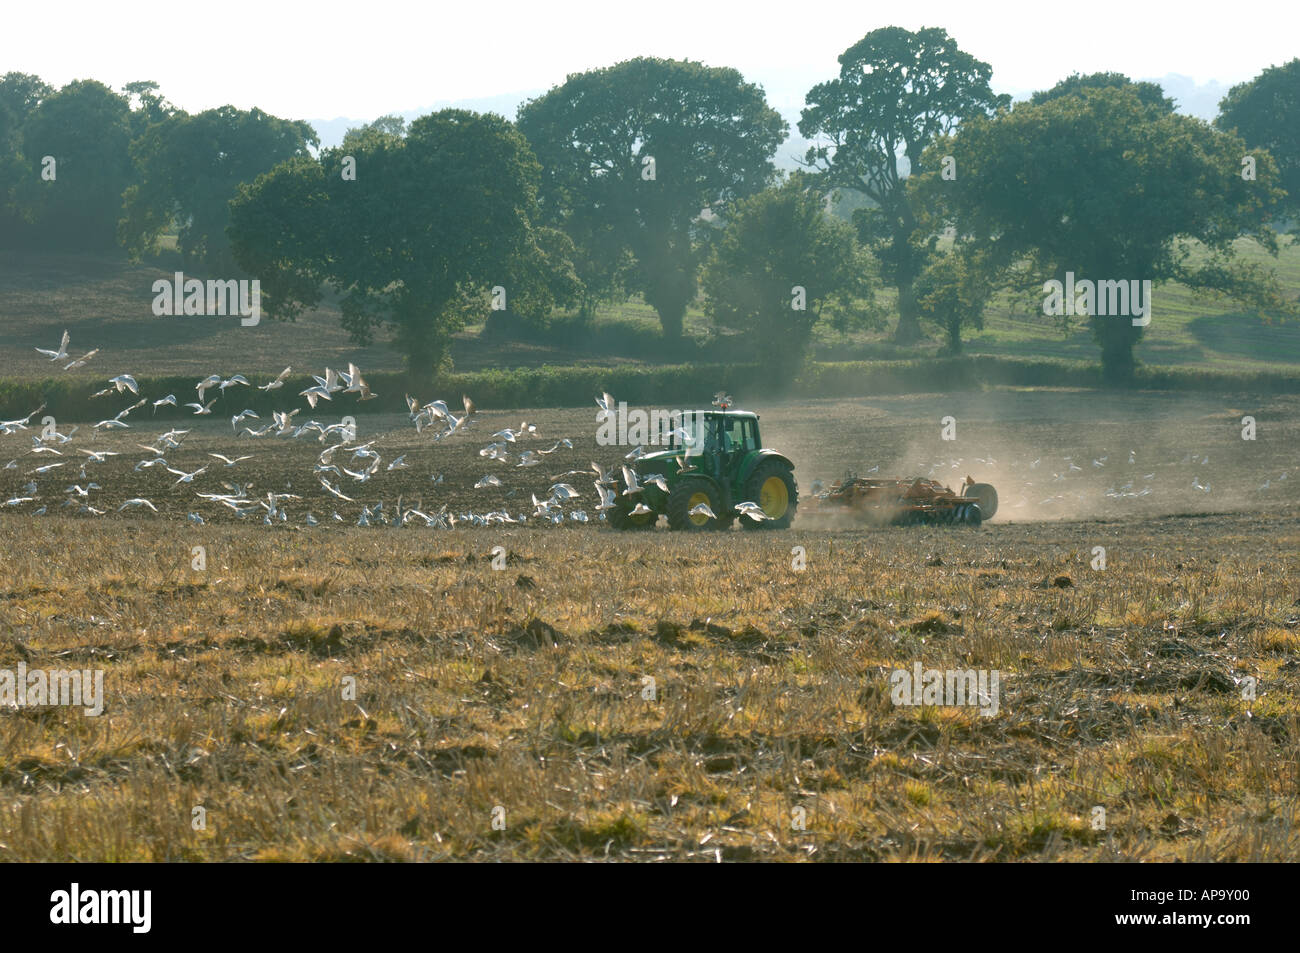 John Deere tractor power disc harrowing subsoiled stubble field with seagulls attending Stock Photo